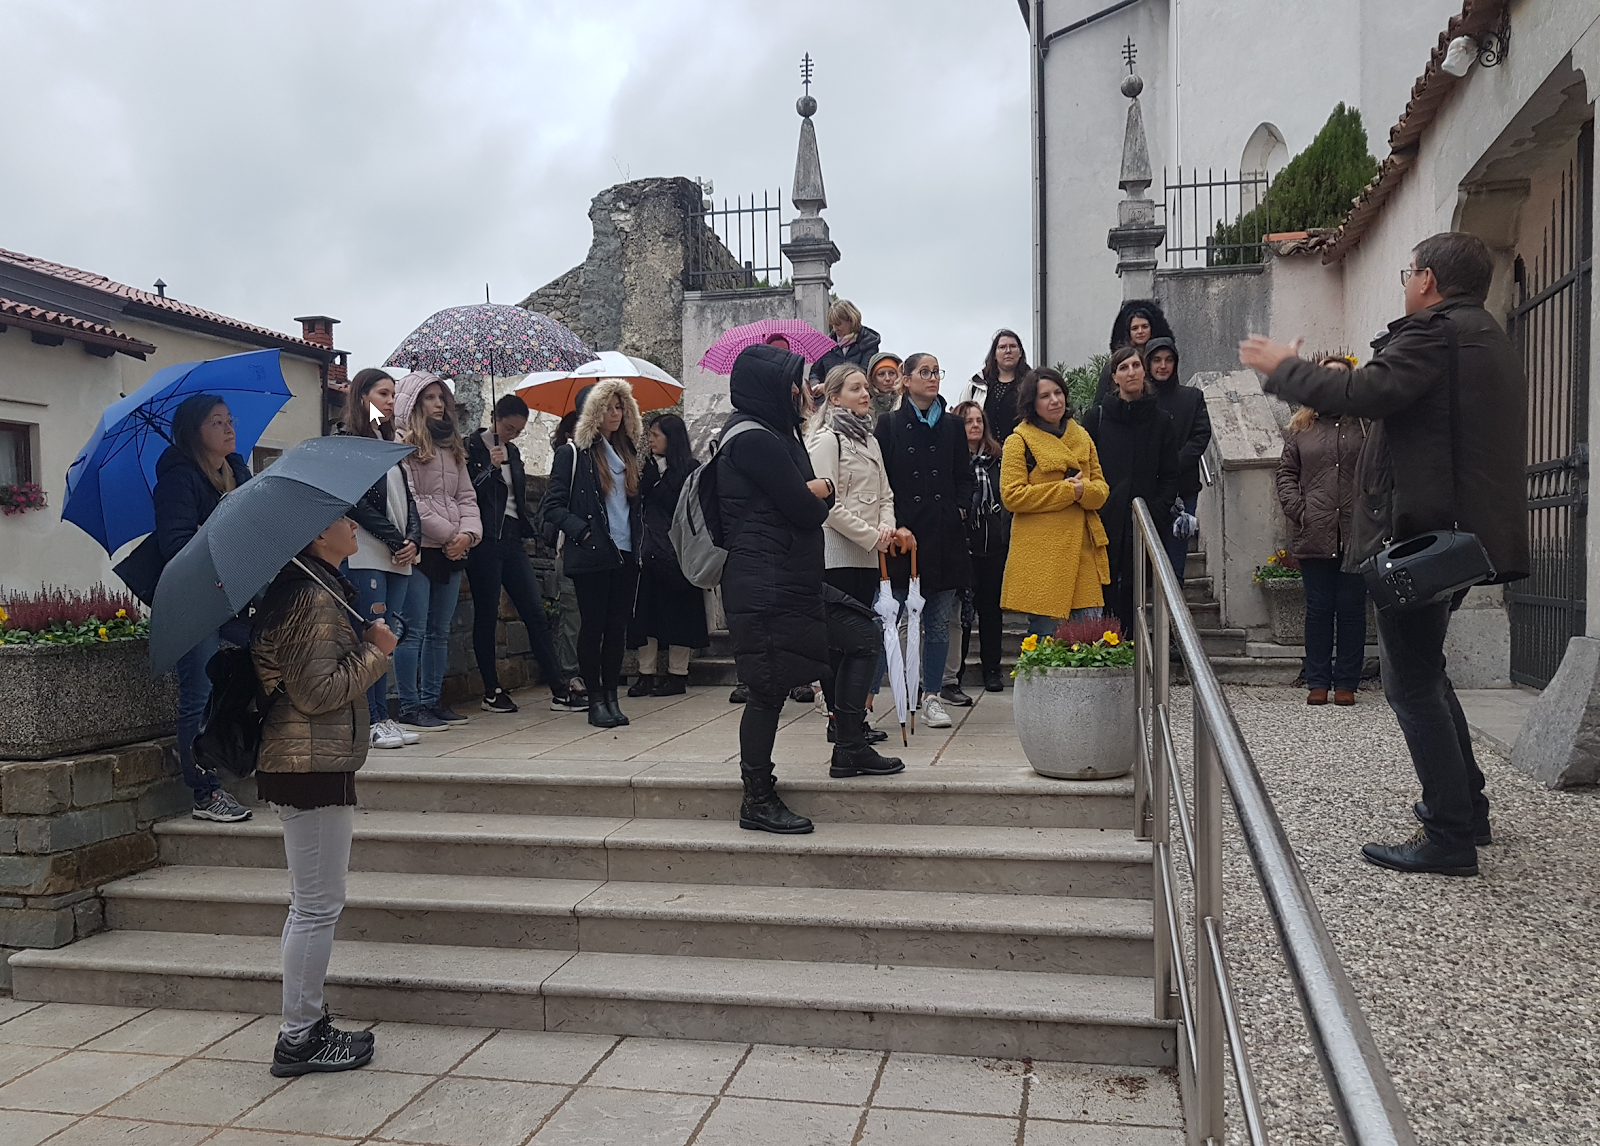 A group of people standing on stairs with umbrellas

Description automatically generated